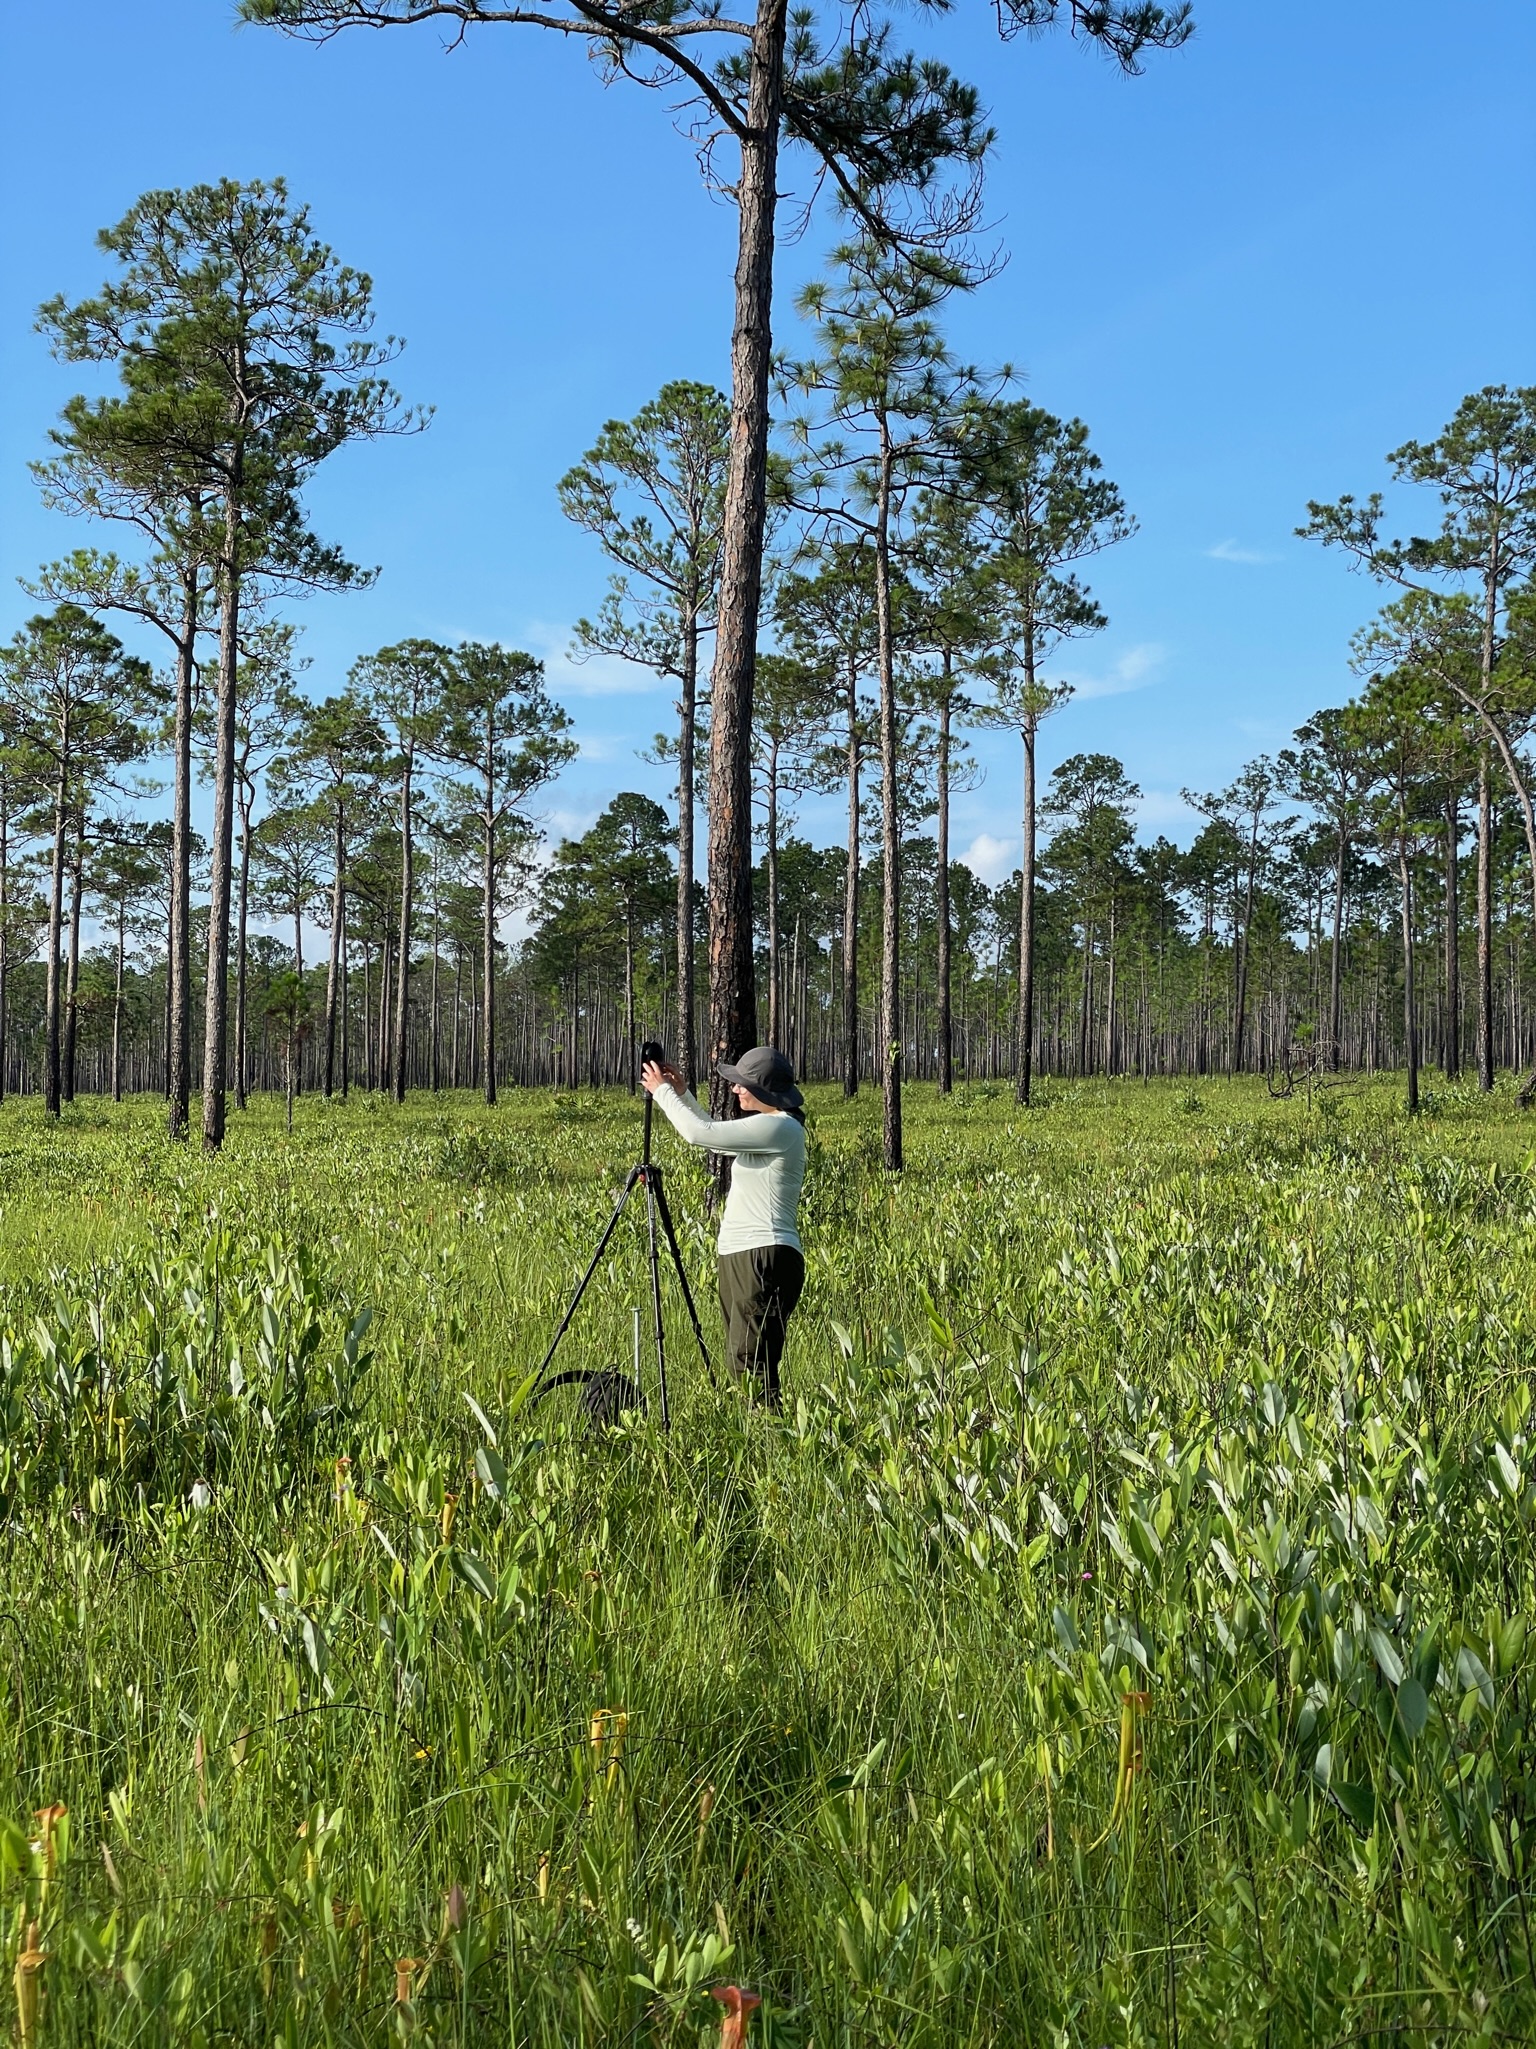 person in field works with object on tripod